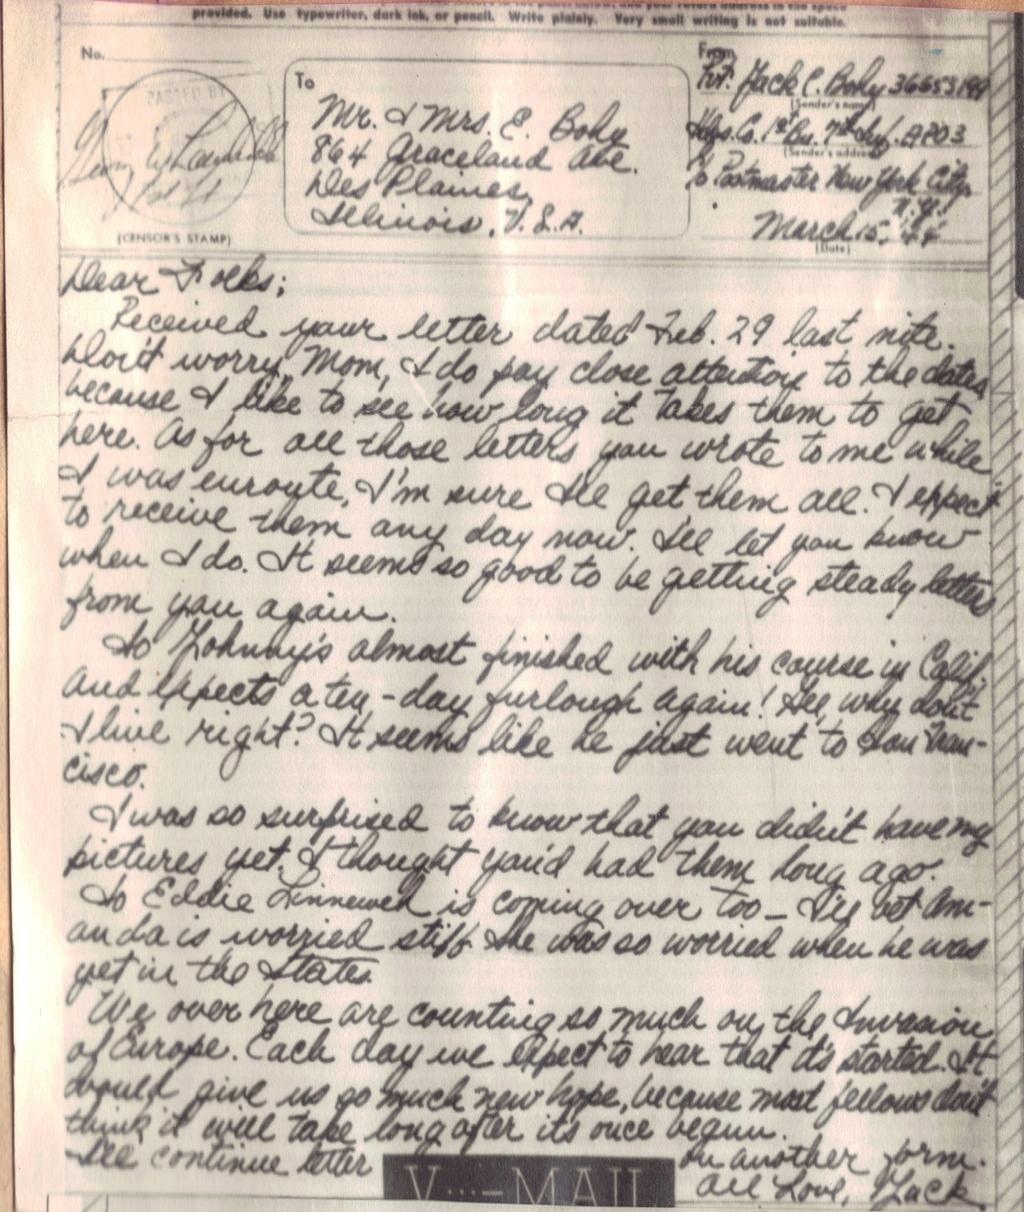 Mar 15, 1944 Dear folks; Received your letter dated Feb. 29 last night. Don't worry Mom, I do pay close attention to the dates because I like to see how long it takes them to get here.